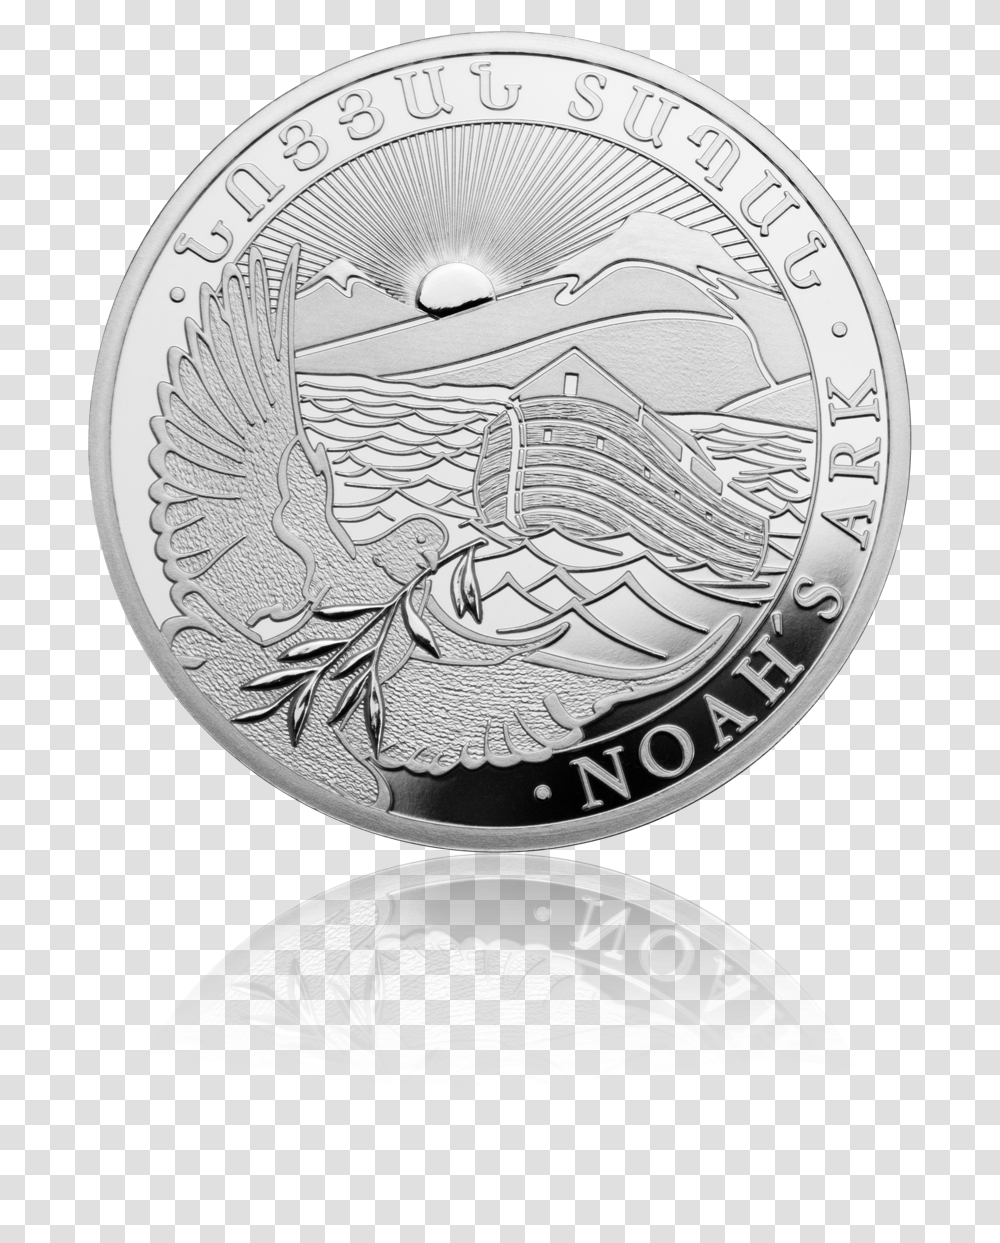 Back Of Noah's Ark Bullion Coin Dram 2015, Money, Silver, Clock Tower, Architecture Transparent Png